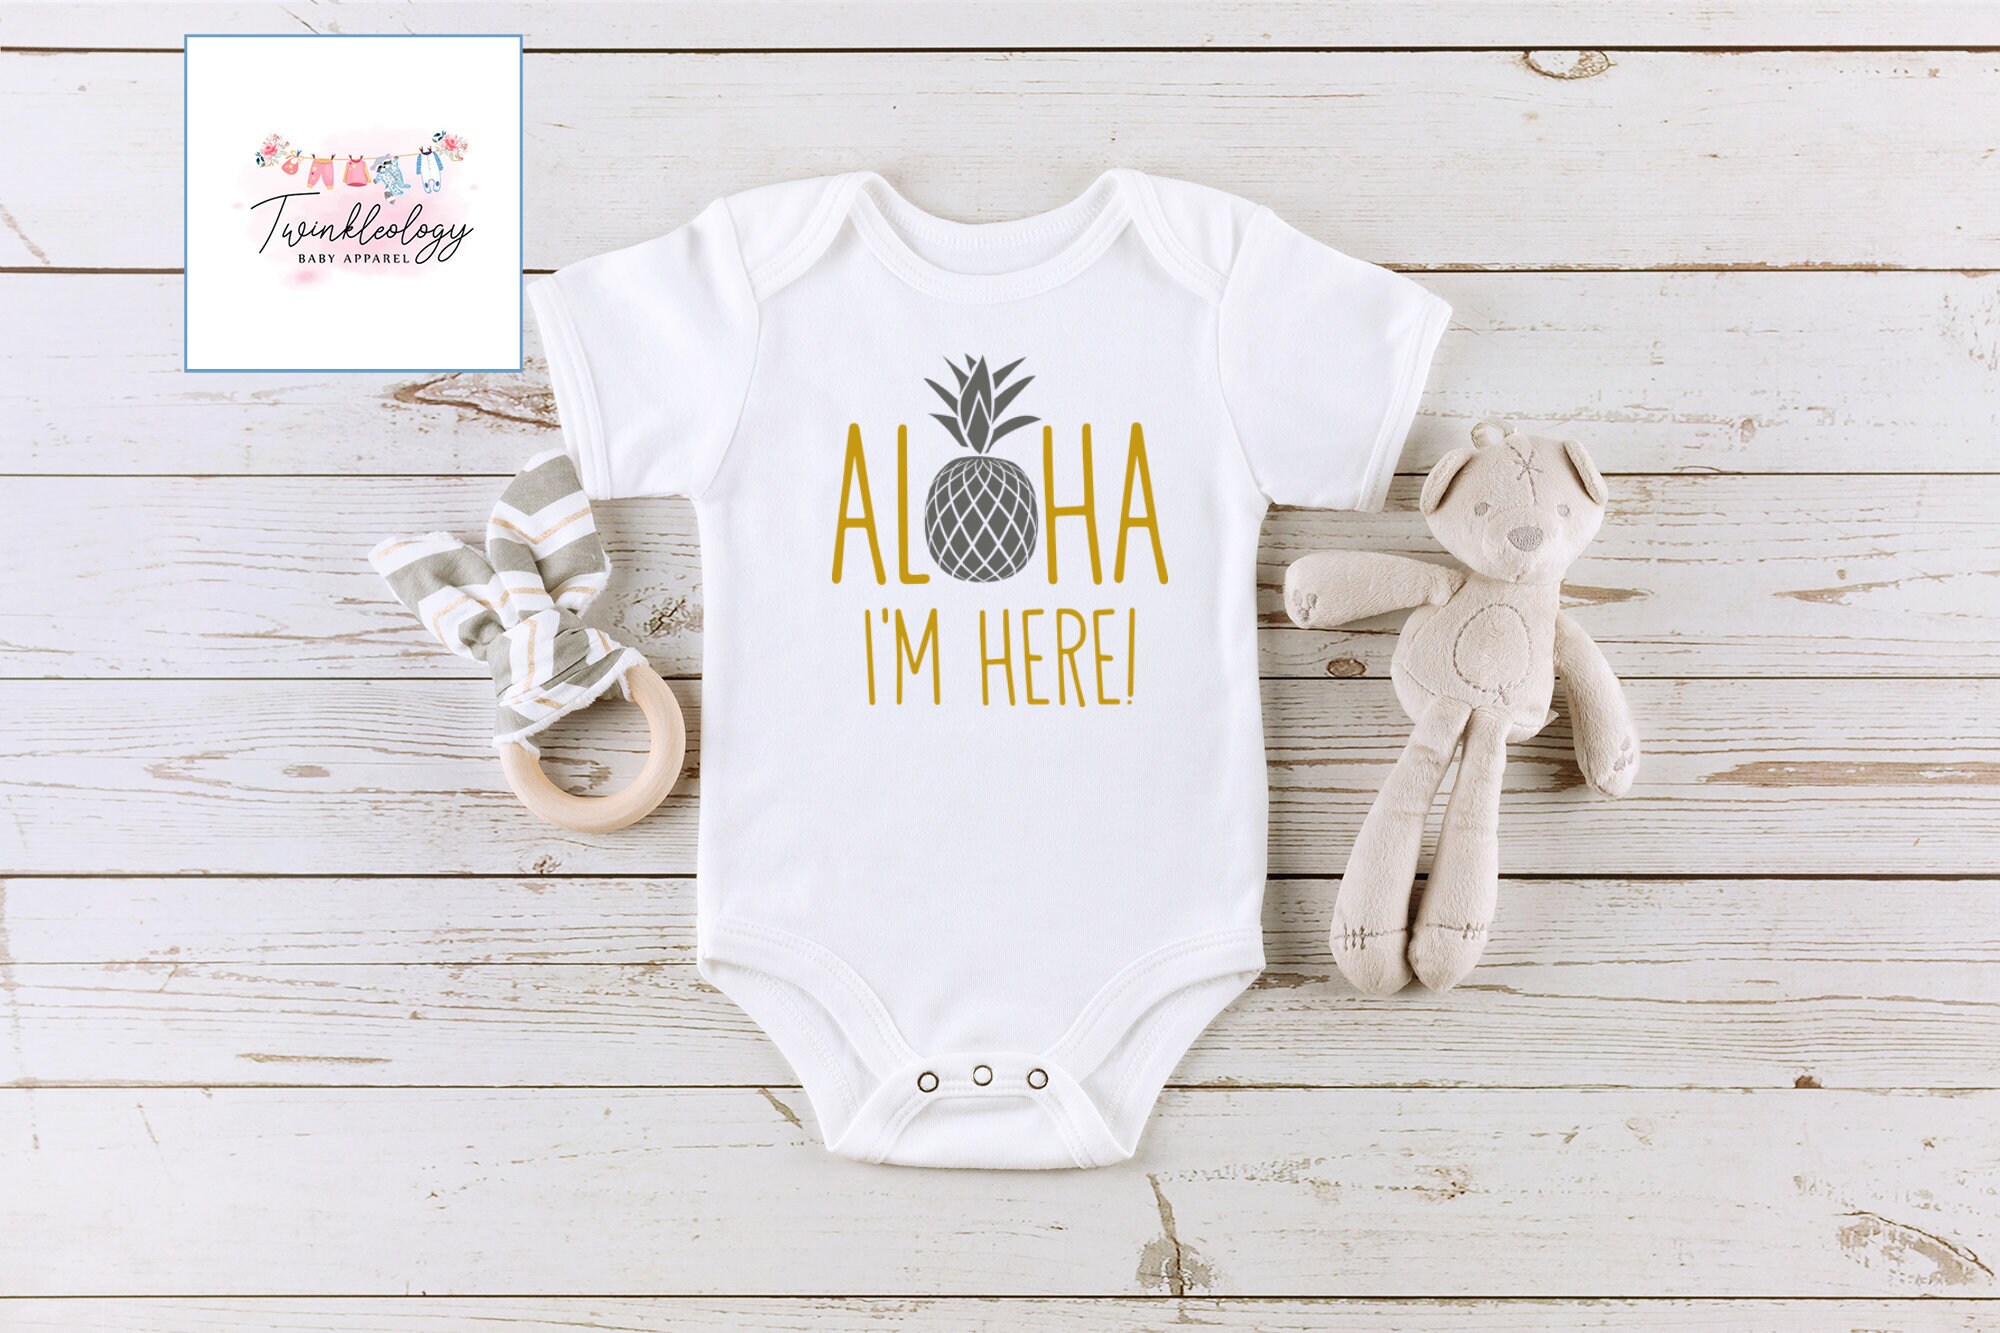  Creative Knitwear University of Hawaii Baby Bodysuit: Clothing,  Shoes & Jewelry